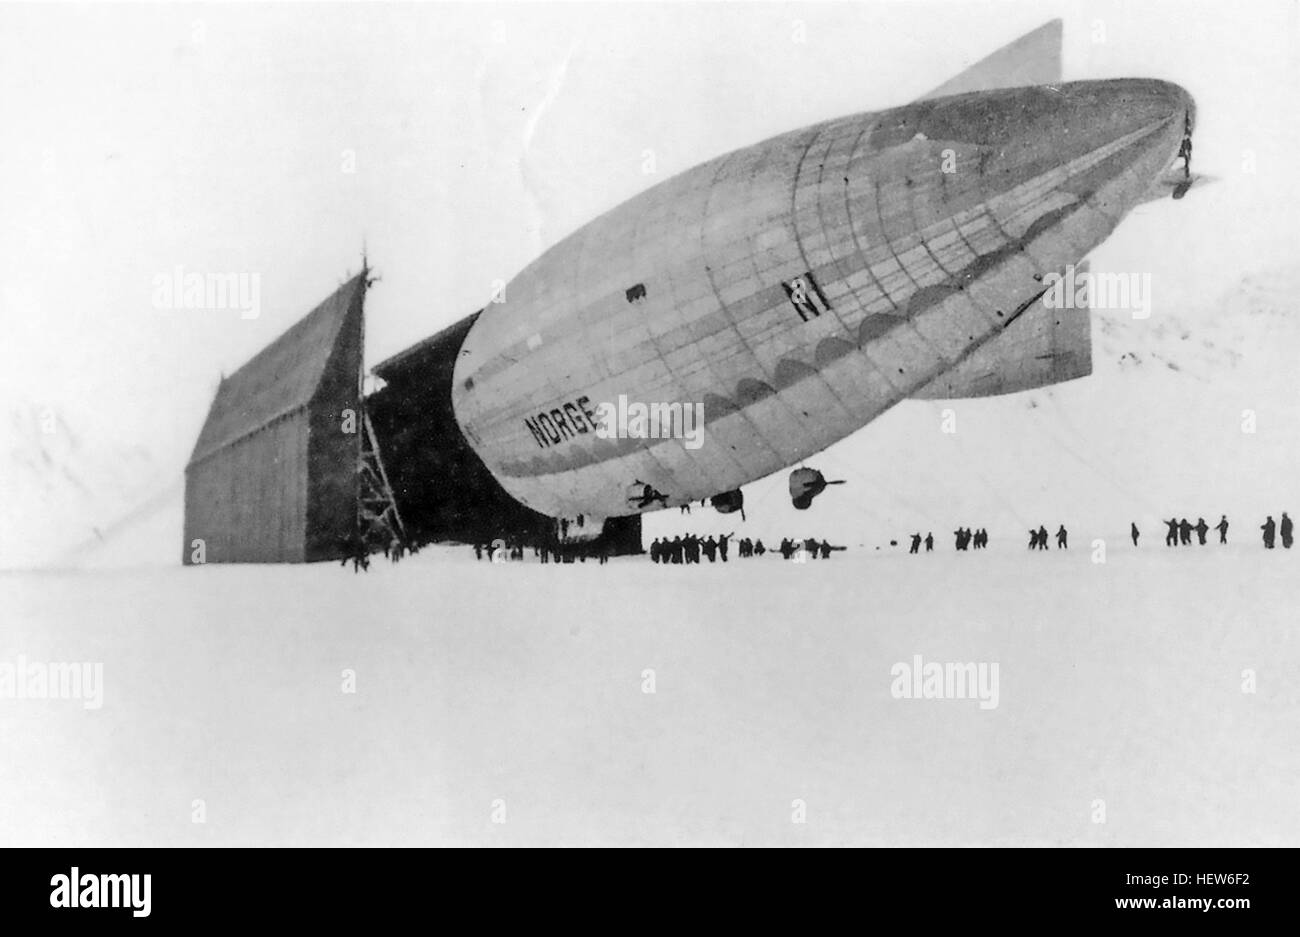 NORGE AIRSHIP entering it's hanger at Ny-Alesund, Svalbard, on 7 May 1926, the last stopping point before reaching the Pole on 12 May, 1926. Photo: NLN Stock Photo